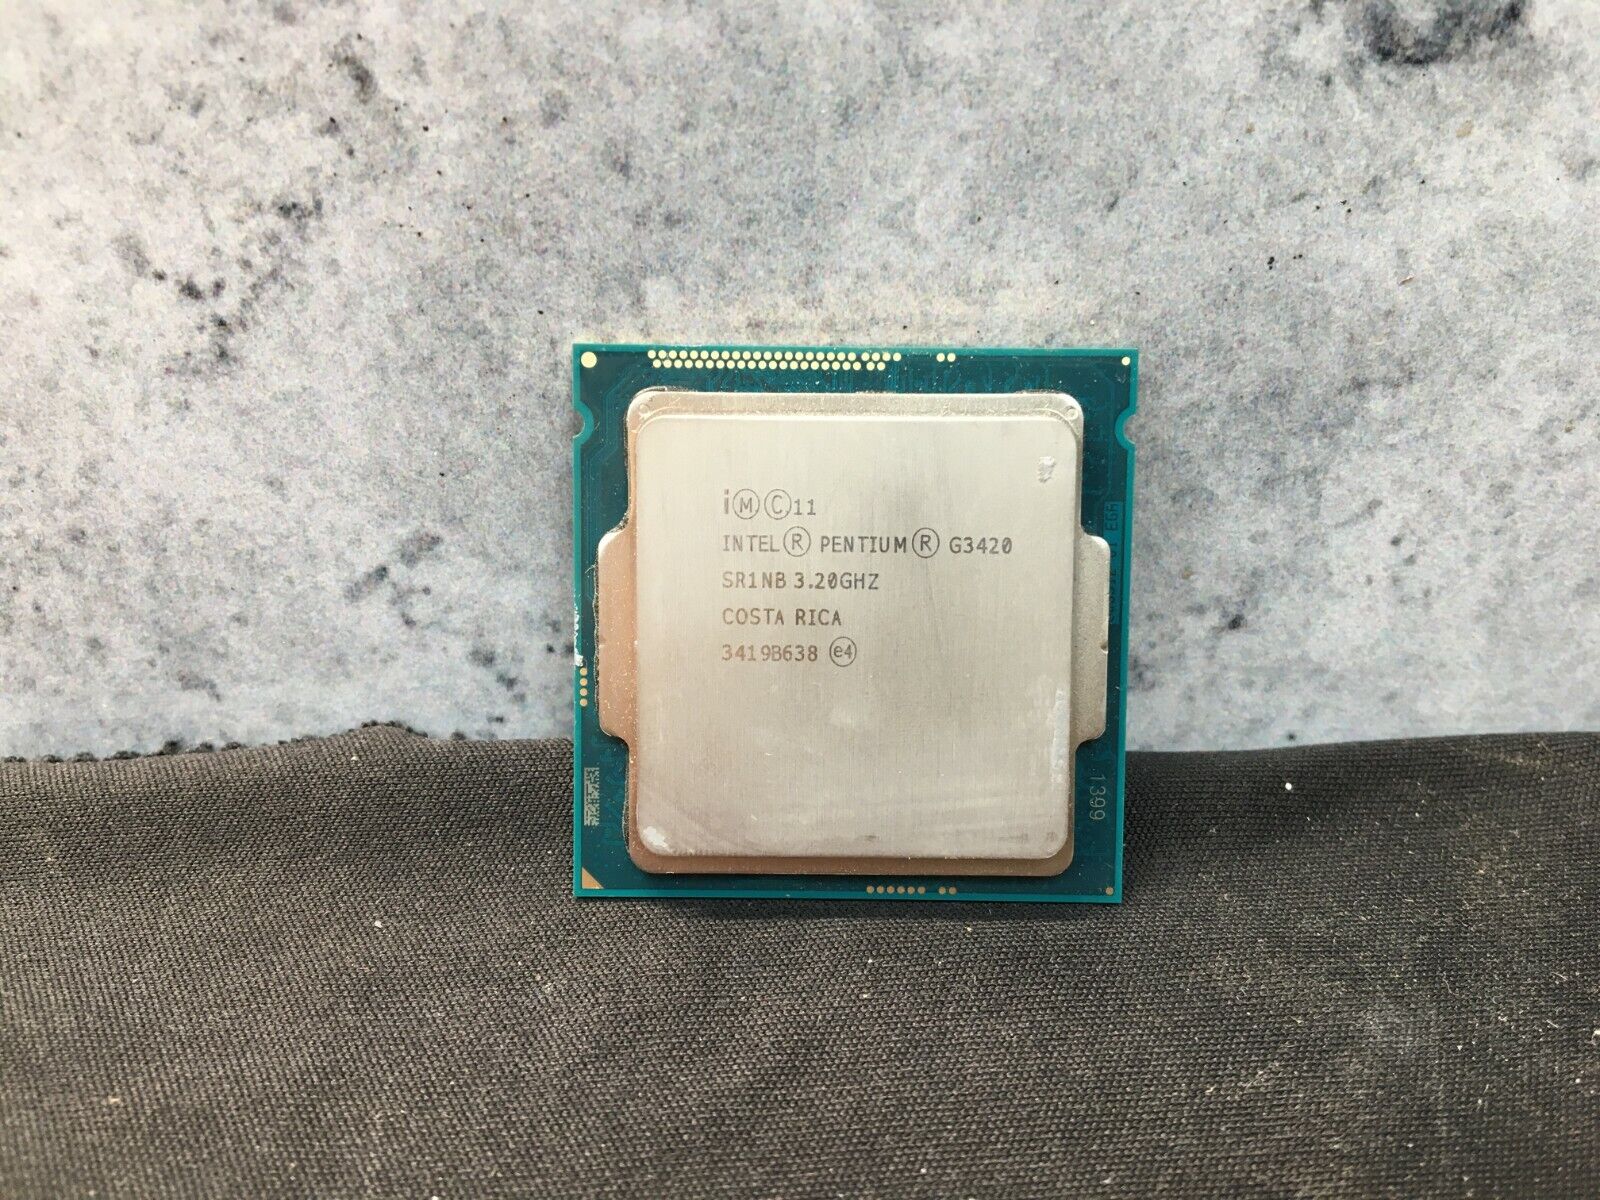 Intel® Pentium® Processor G3420 3M Cache, 3.20 GHz CPU *From Working System*